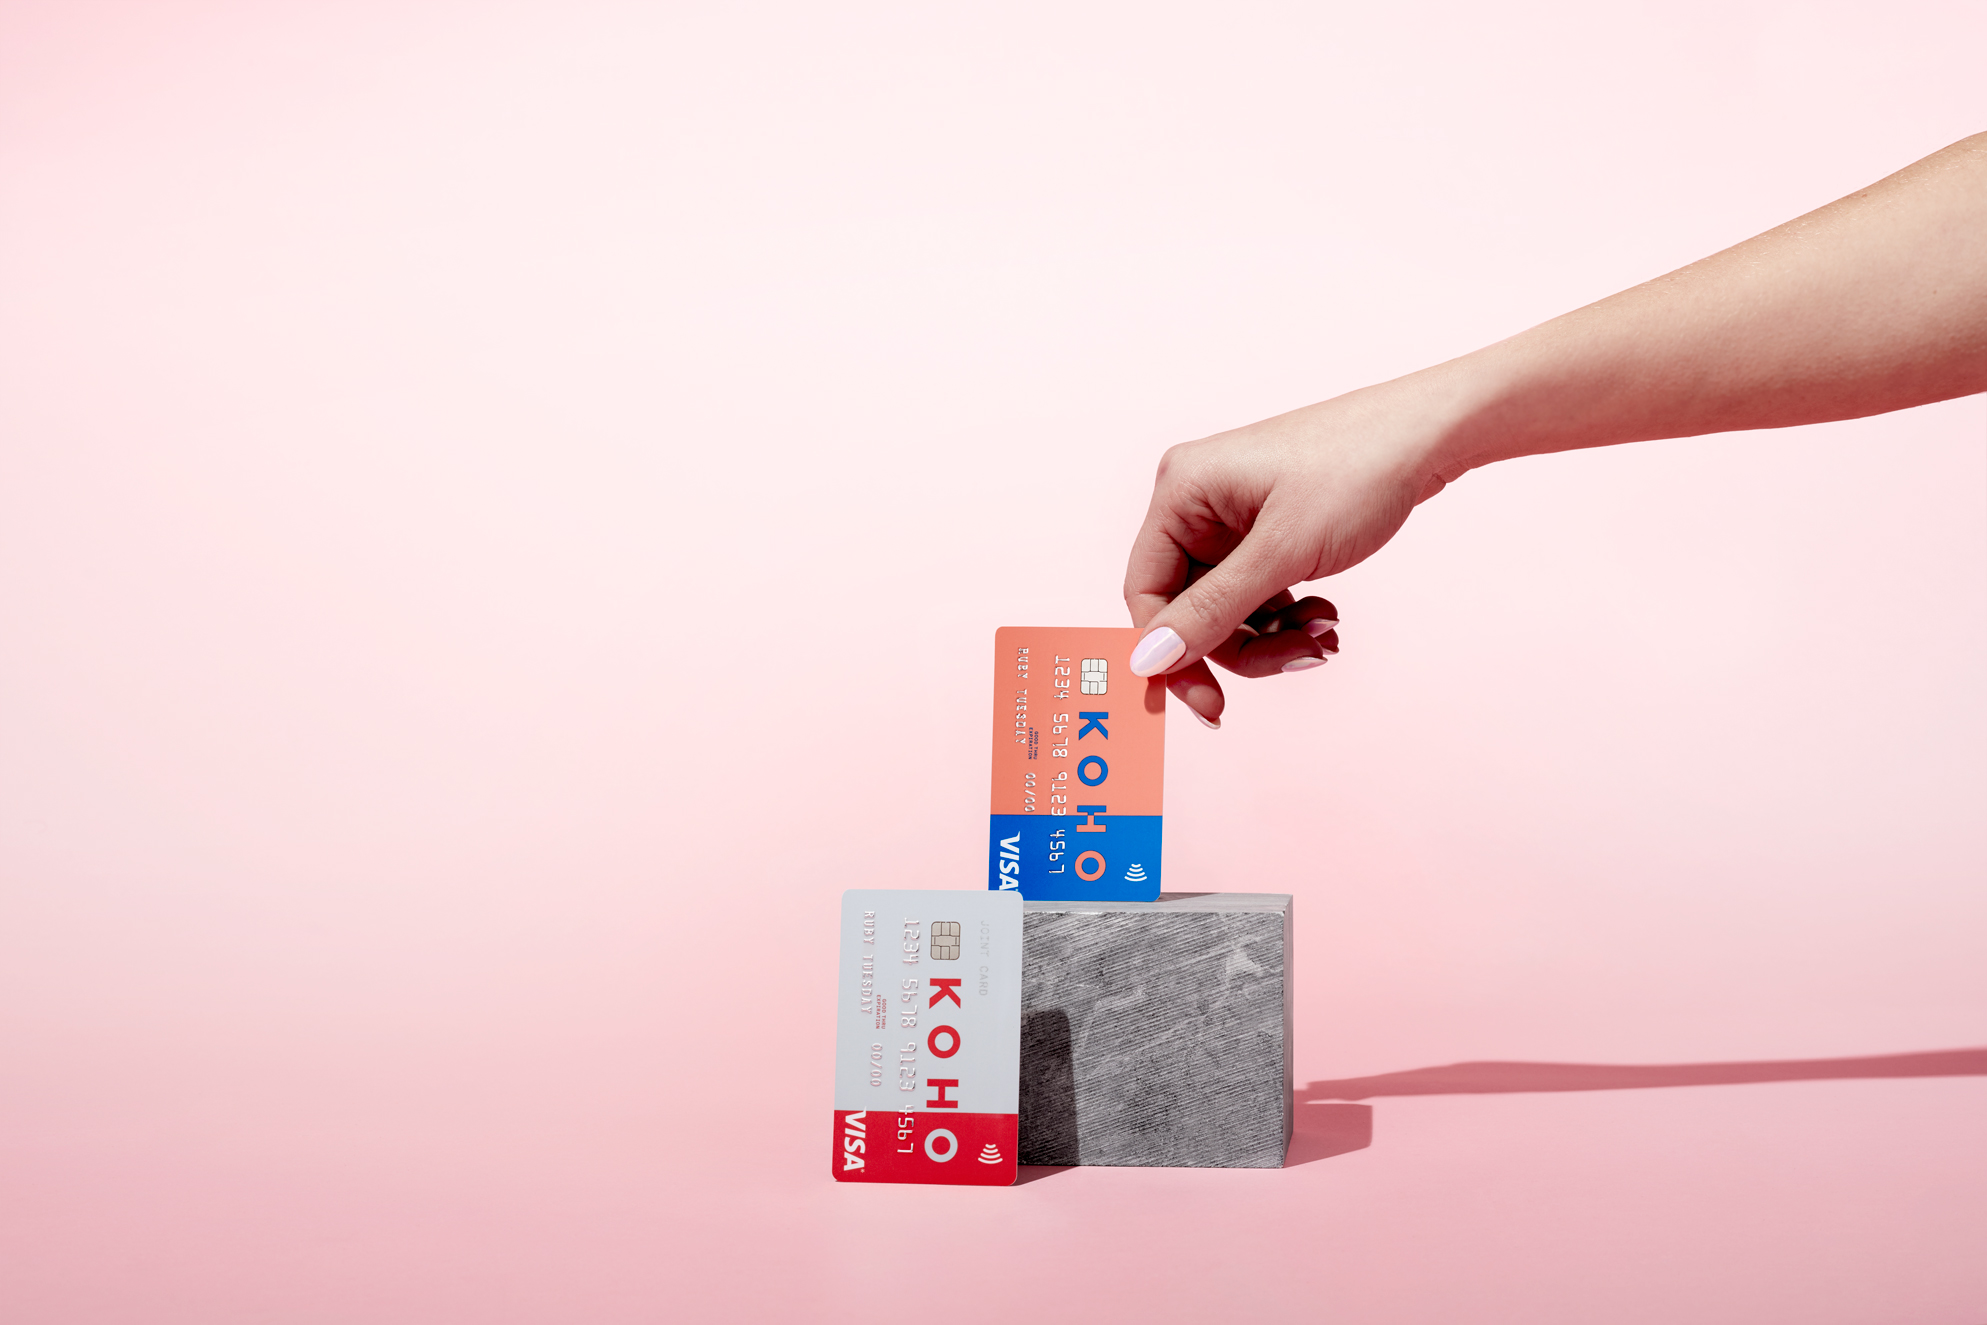 Fees From Overseas: KOHO Teams Up With TransferWise to Uncover Remittance Fees thumbnail